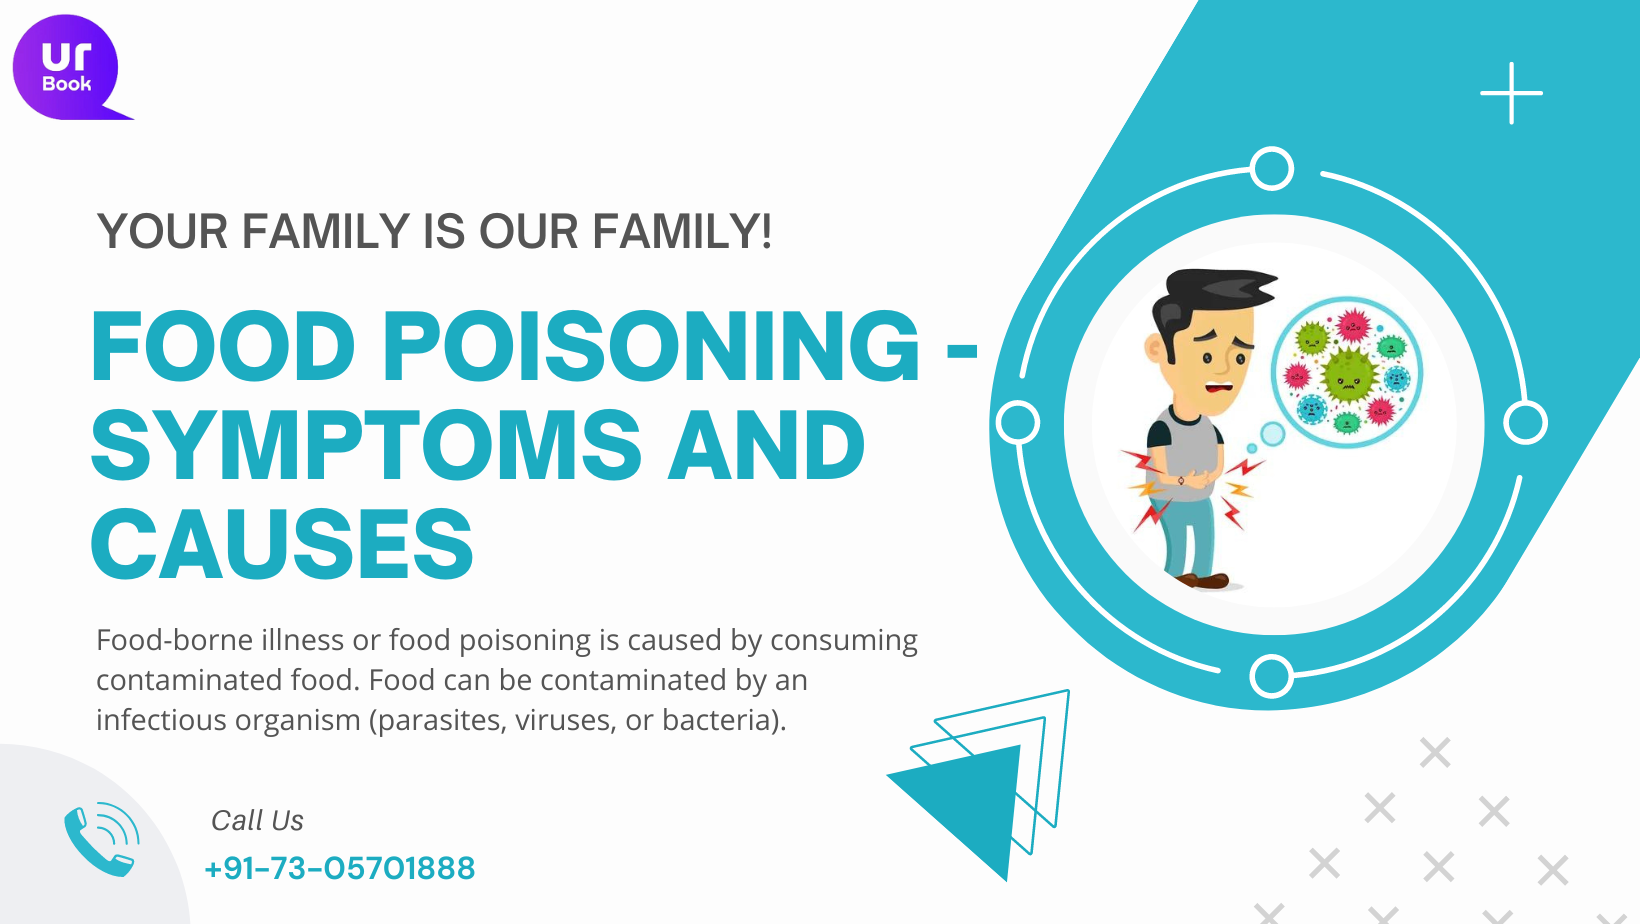 Book

YOUR FAMILY IS OUR FAMILY!

FOOD POISONING -
SYMPTOMS AND
CAUSES

Food-borne illness or food poisoning is caused by consuming
contaminated food. Food can be contaminated by an

infectious organism (parasites, viruses, or bacteria).
Q Call Us
+91-73-05701888